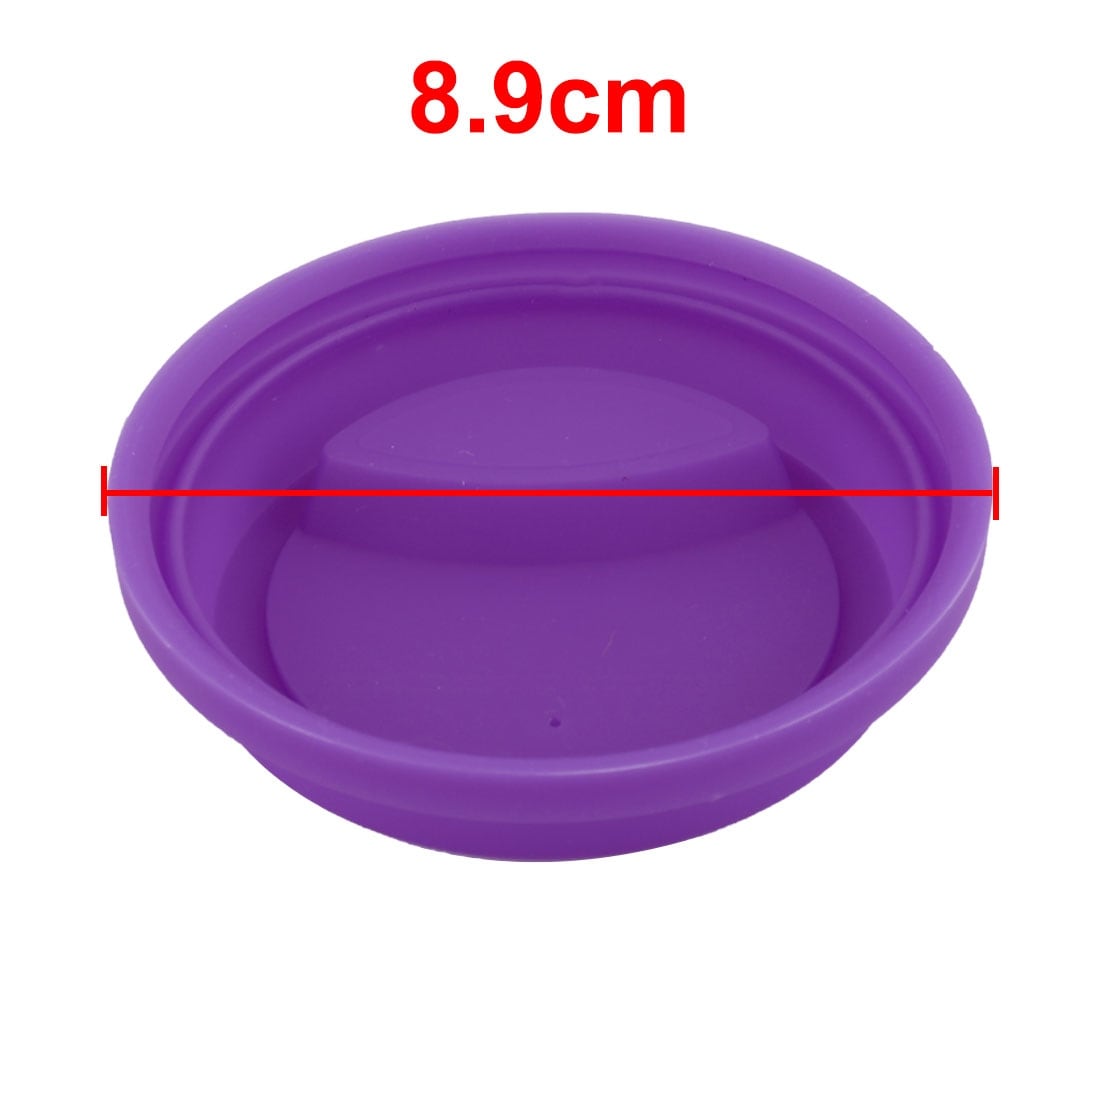 https://ak1.ostkcdn.com/images/products/is/images/direct/0e0375b04a803d2cab7fbc55184ca1077465f74f/Silicone-Round-Shaped-Resuable-Sealed-Mug-Lid-Tea-Coffee-Cup-Cover.jpg